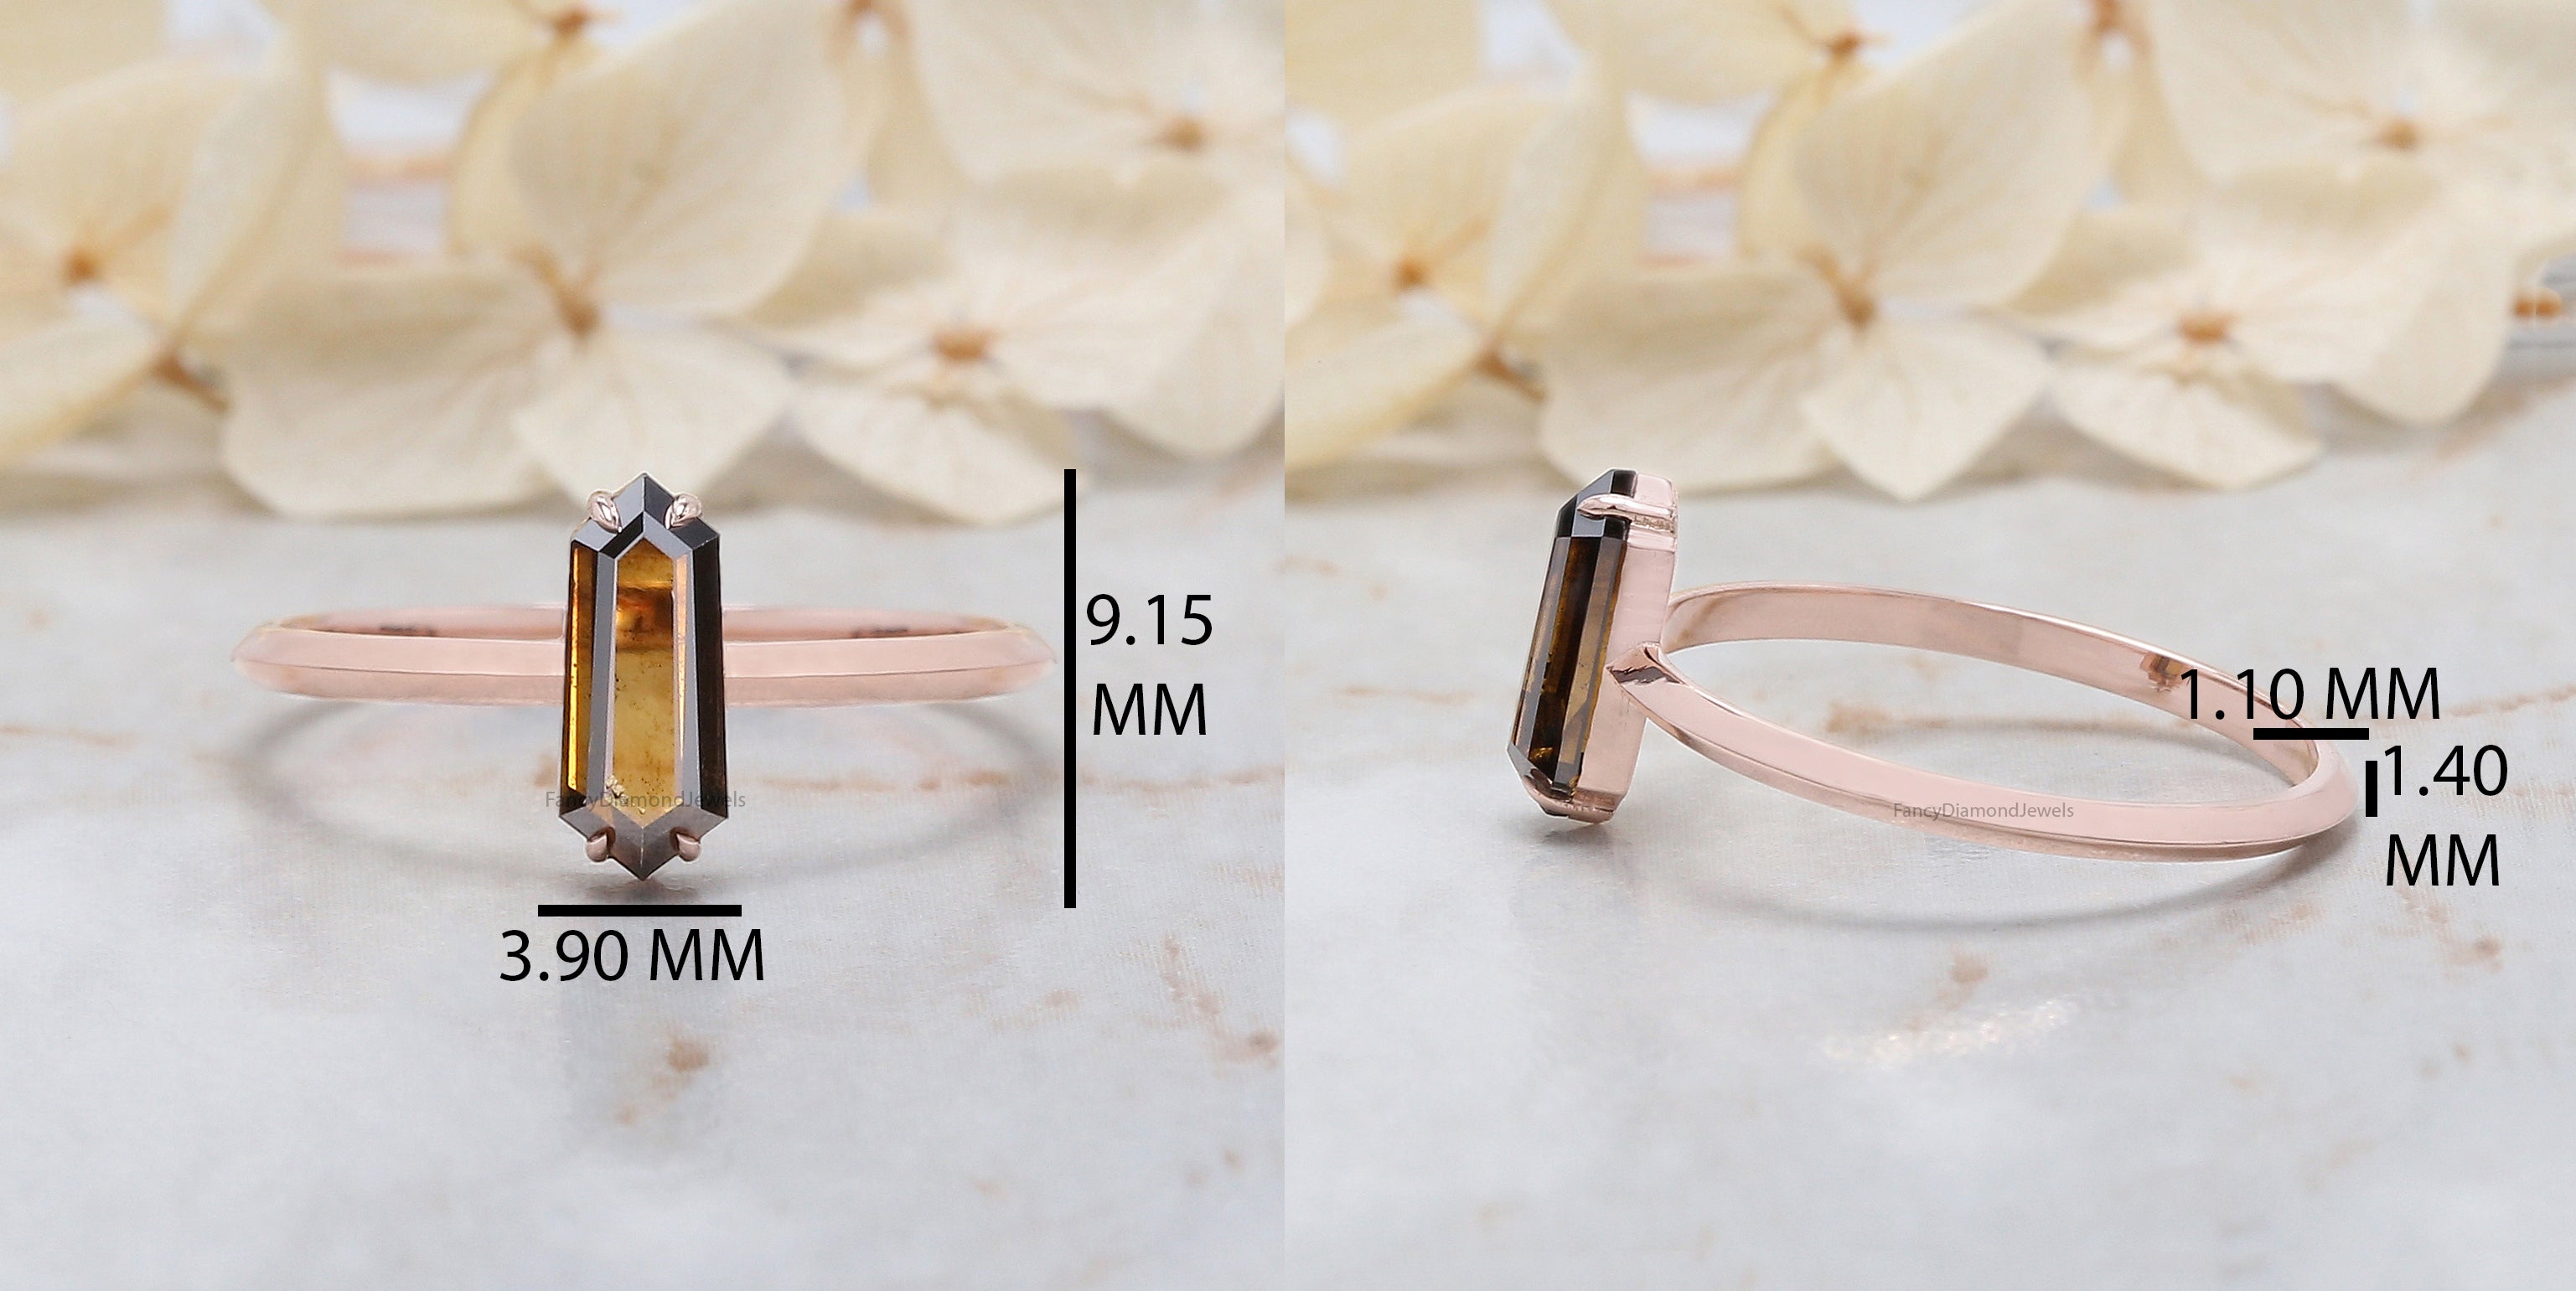 Shield Shape Brown Color Diamond Ring 0.82 Ct 9.00 MM Shield Cut Diamond Ring 14K Solid Rose Gold Silver Engagement Ring Gift For Her QL1658